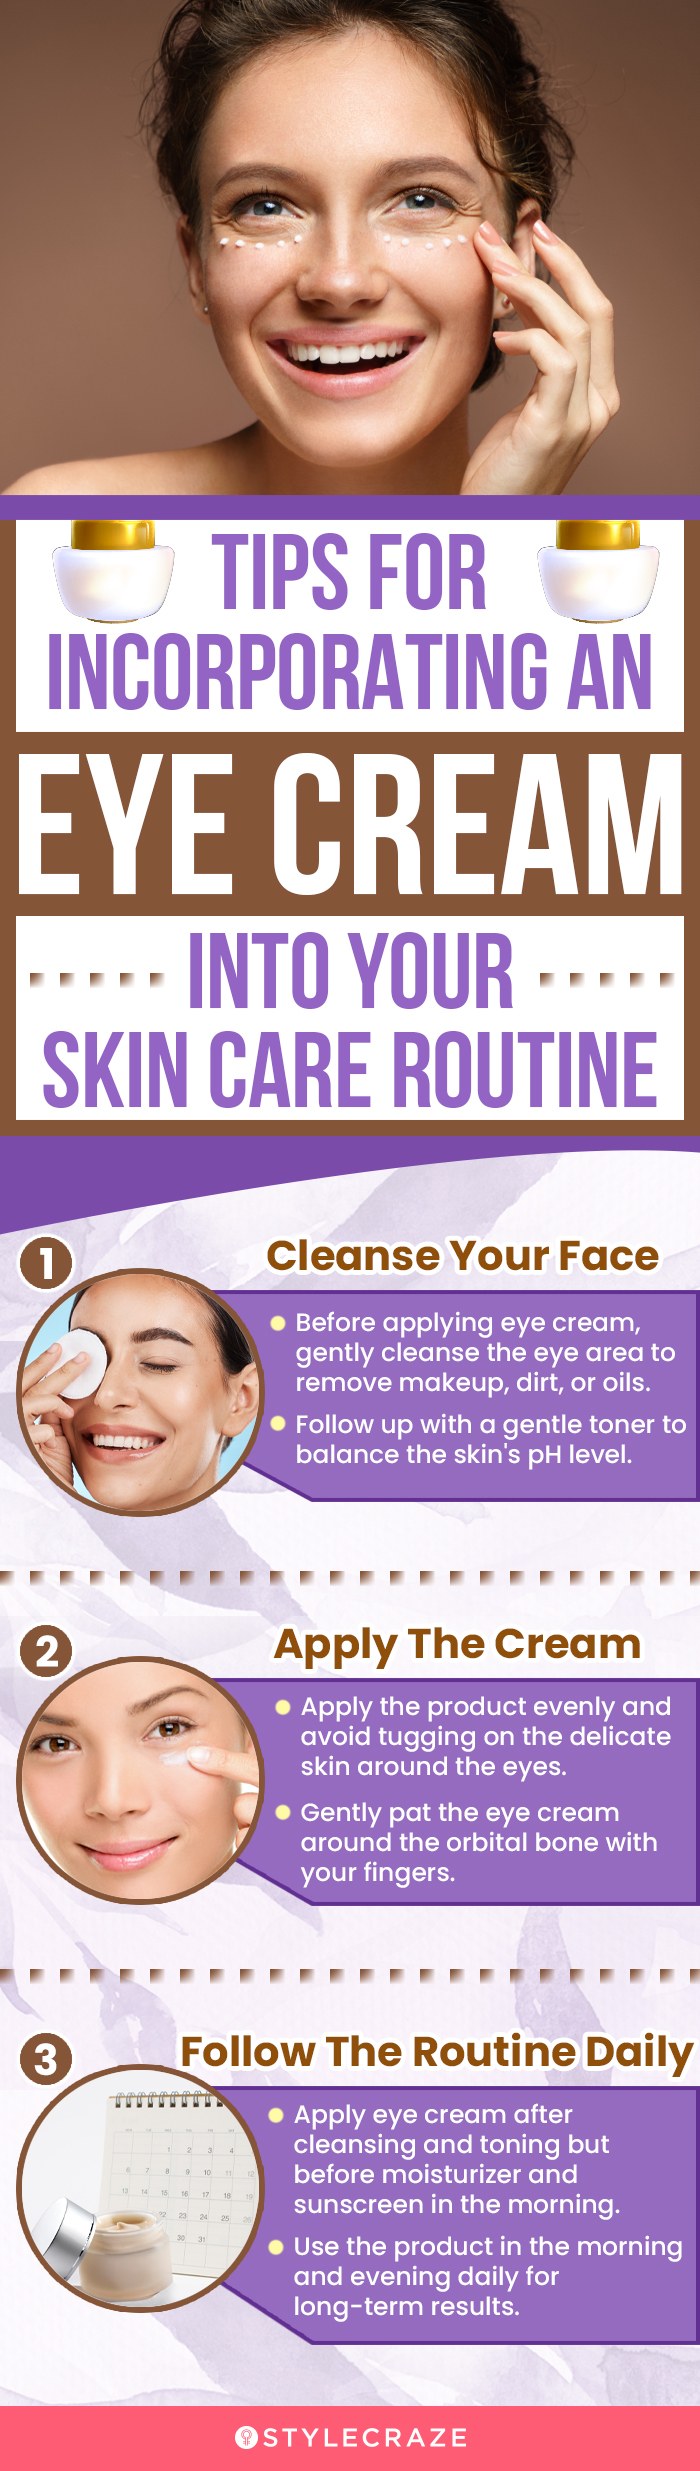 Tips For Incorporating An Eye Cream Into Your Skin Care Routine (infographic)